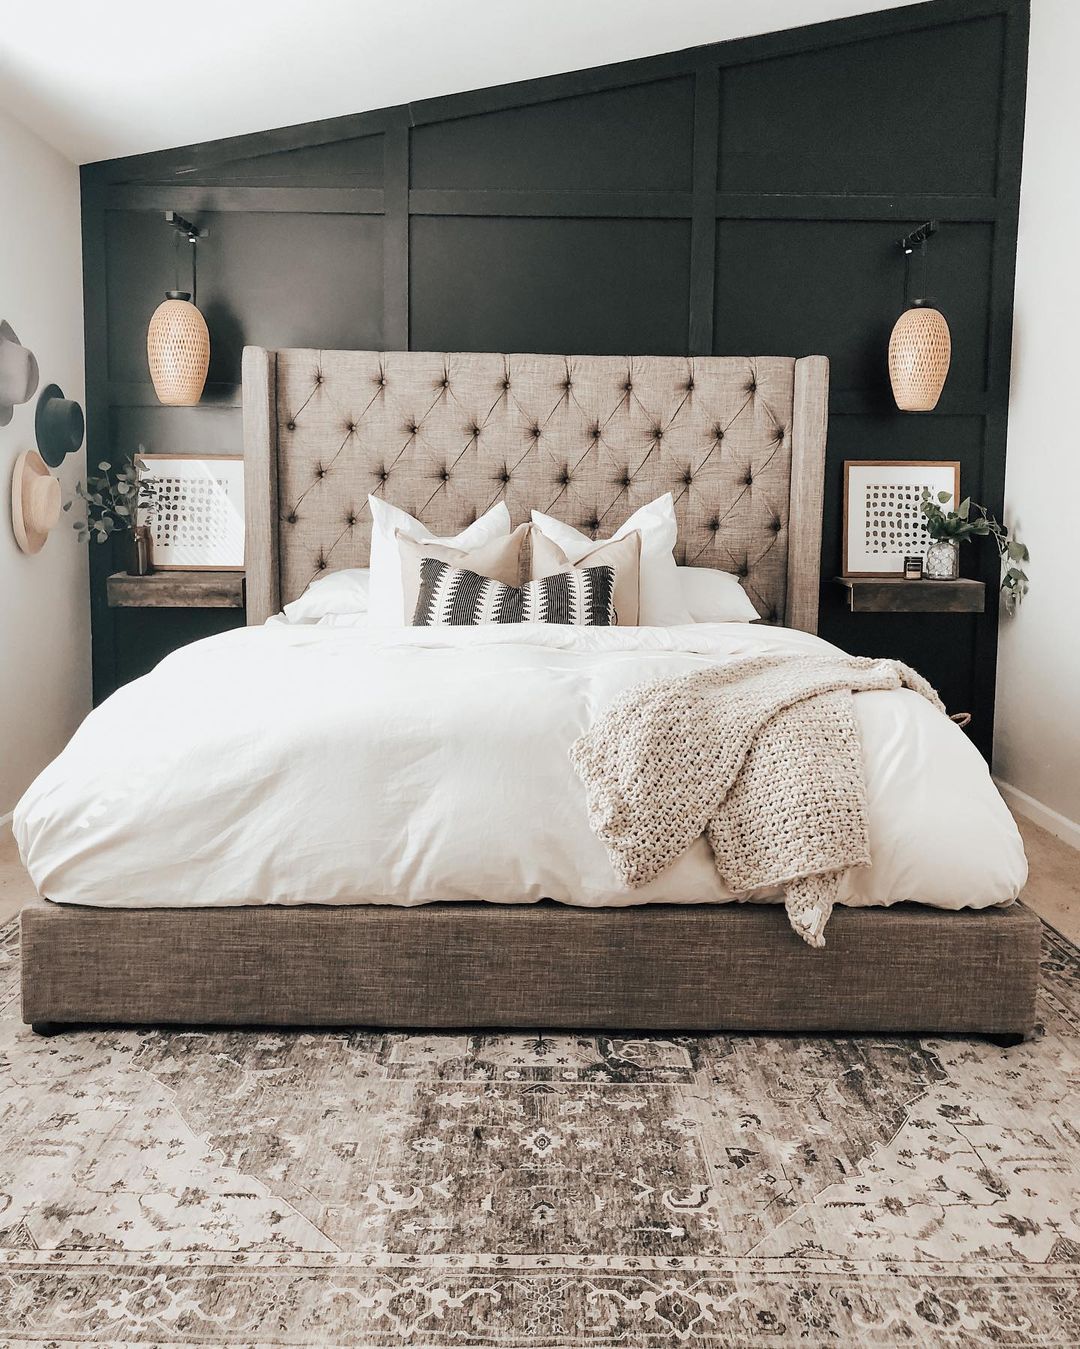 Farmhouse Style Master Bedroom with Board and Batten Feature Wall. Photo by Instagram user @linseywoods.home